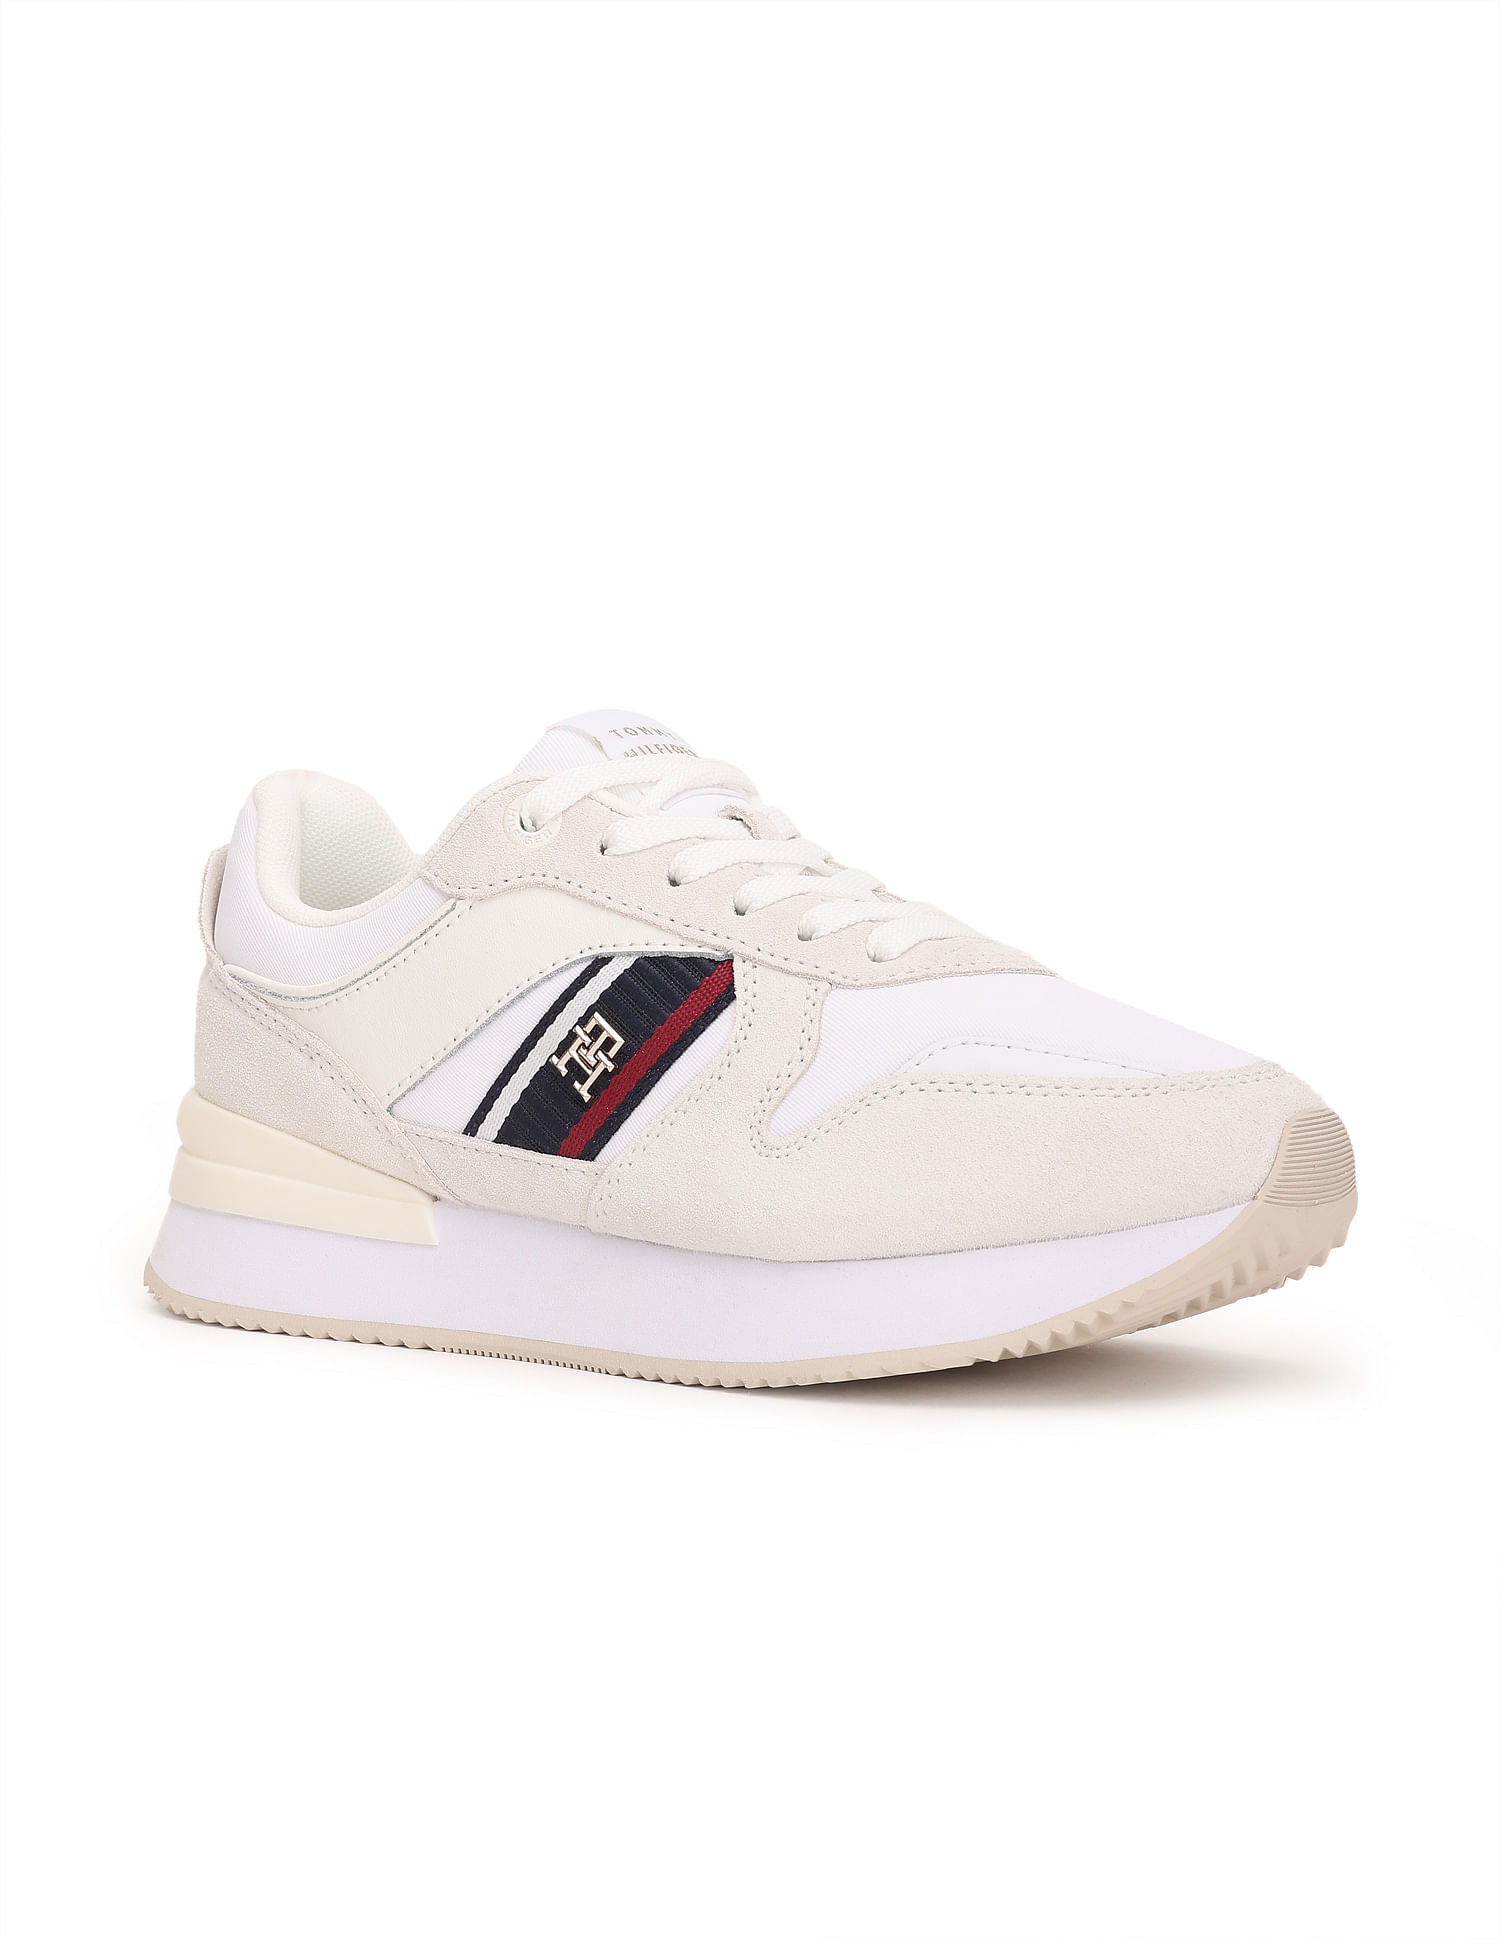 Buy Tommy Hilfiger Leather Solid White Women Flat Sneakers (F23HWFW154)  Size- 36 at Amazon.in